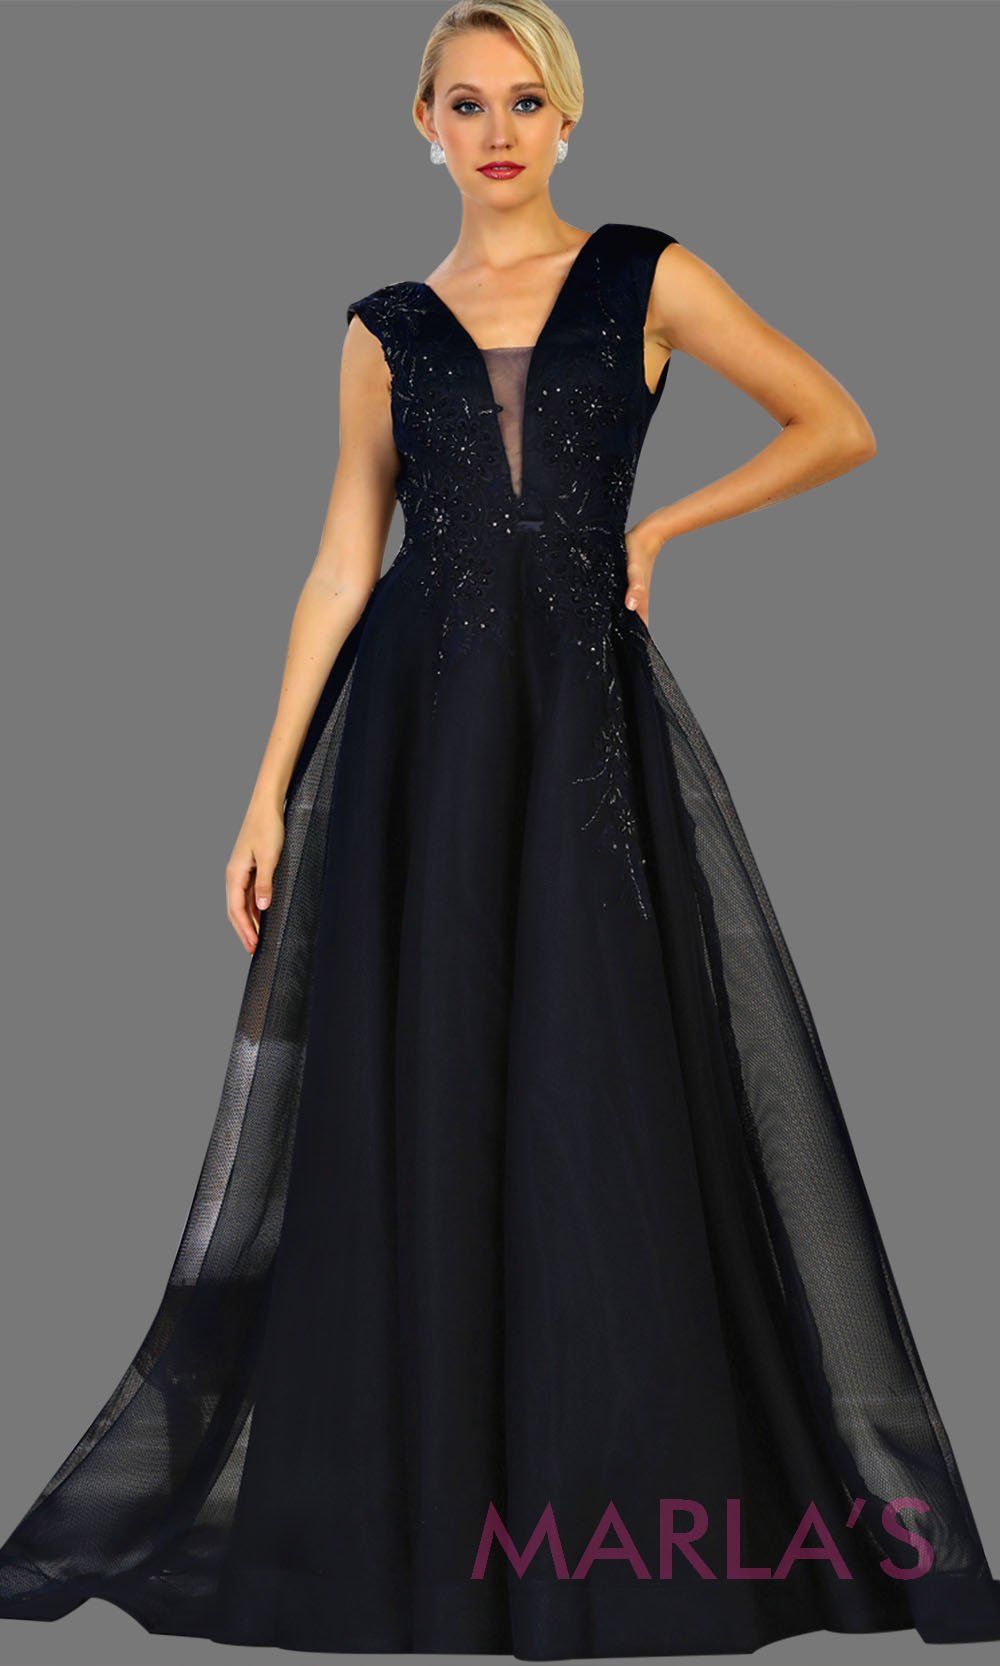 Long navy v neck ball gown dress with plunging neckline and flowy skirt. Dark blue dress is perfect for formal wedding, gala, wedding guest dress, quinceanera, sweet 16, wedding reception dress, engagement dress.Plus size avail